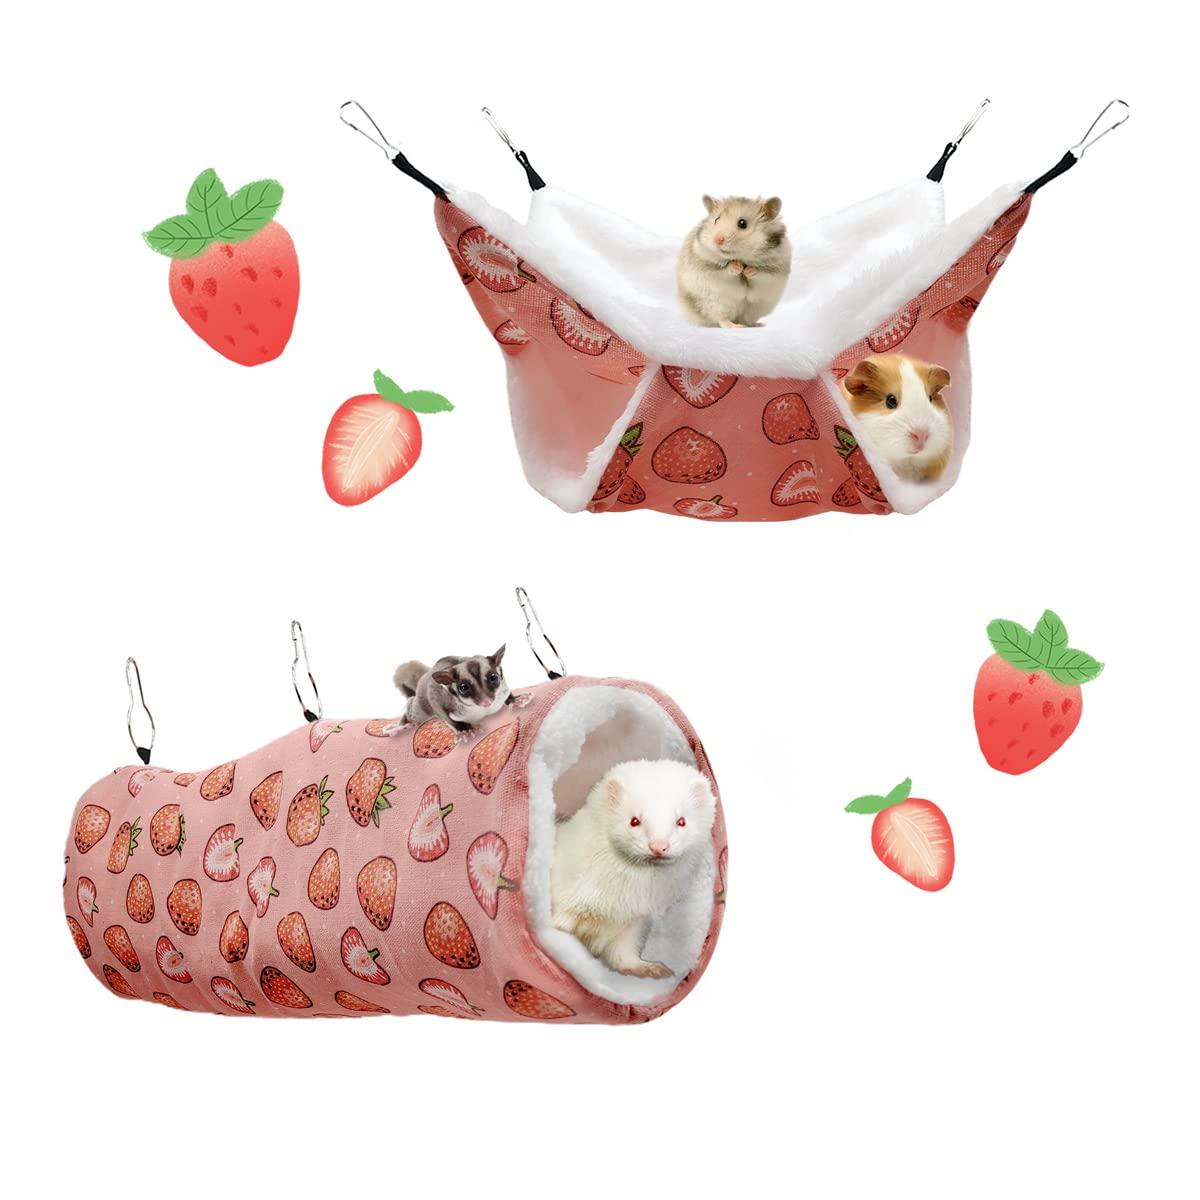 LEFTSTARER Pet Small Animal Hanging Hammock Ferret Bunkbed Hammock Cage Toy for Hamster Rat Sugar Glider Parrot Guinea Pig Hideout Play Sleep (Strawberry Hammock and Tunnel)